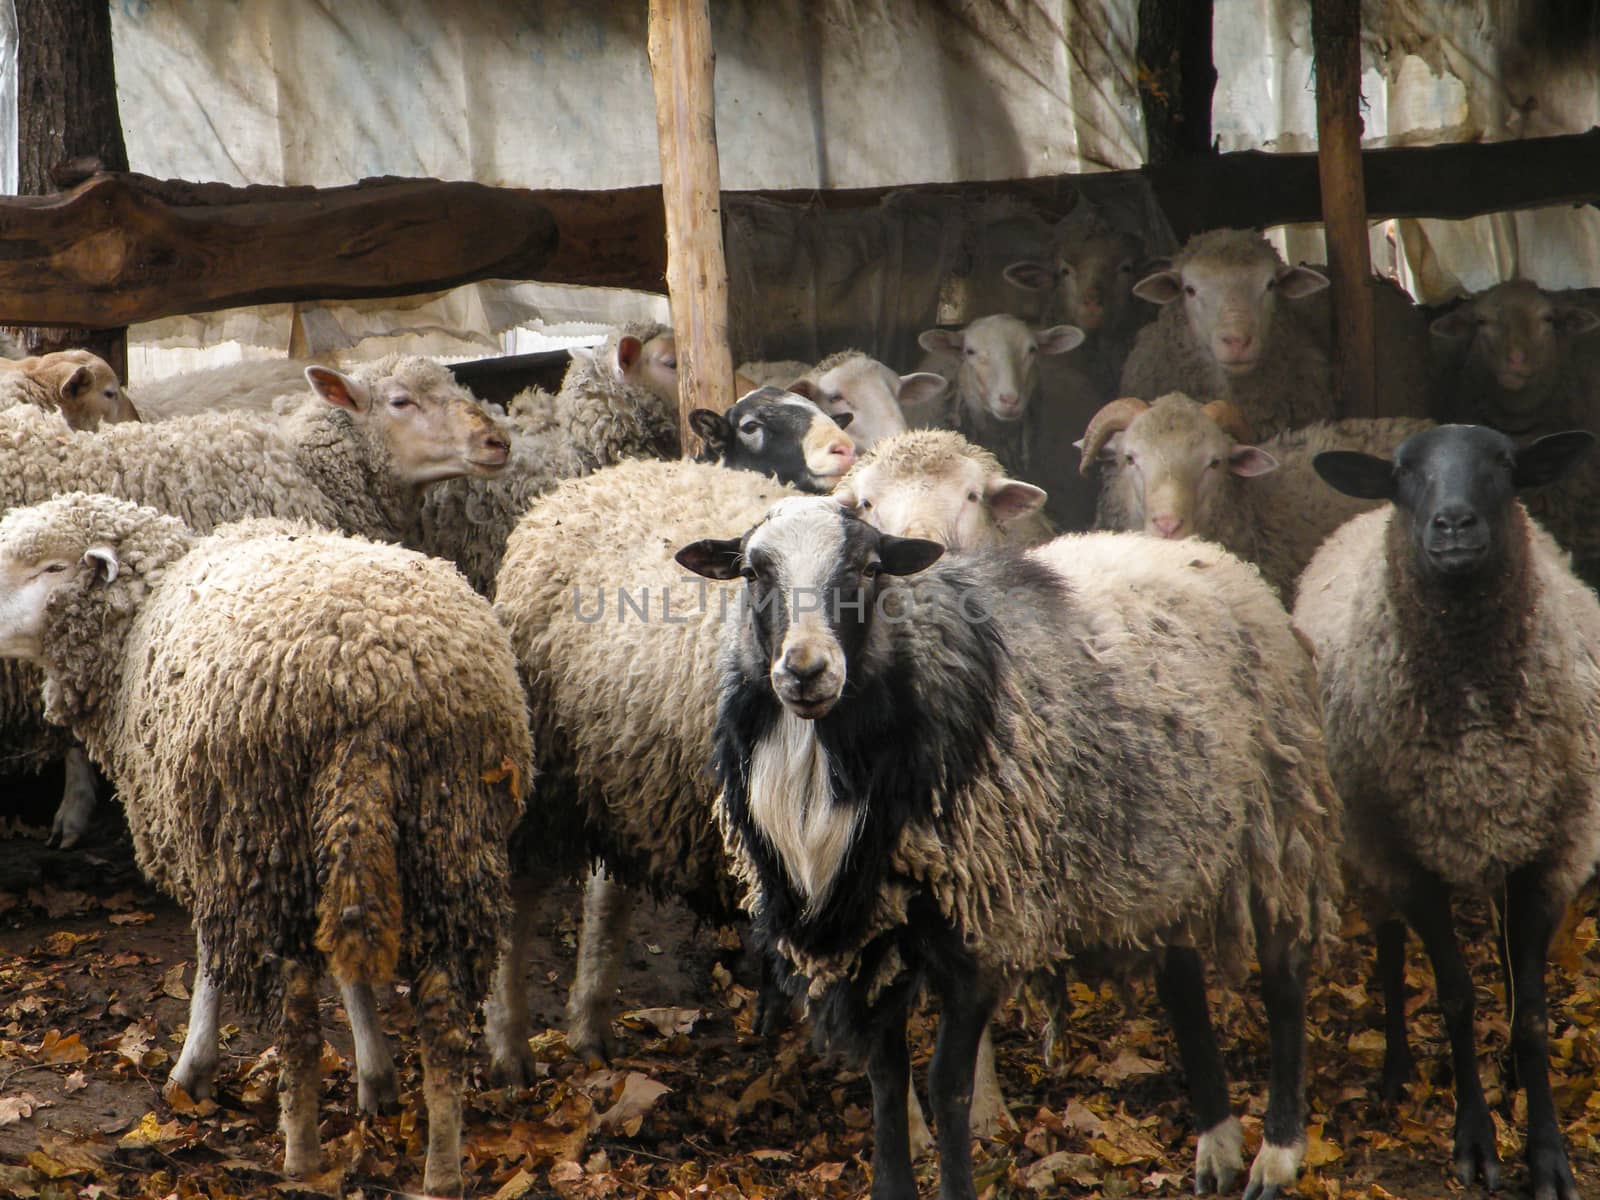 Portrait of sheep in flock. Portrait of cute sheep in herd looking at camera by mtx